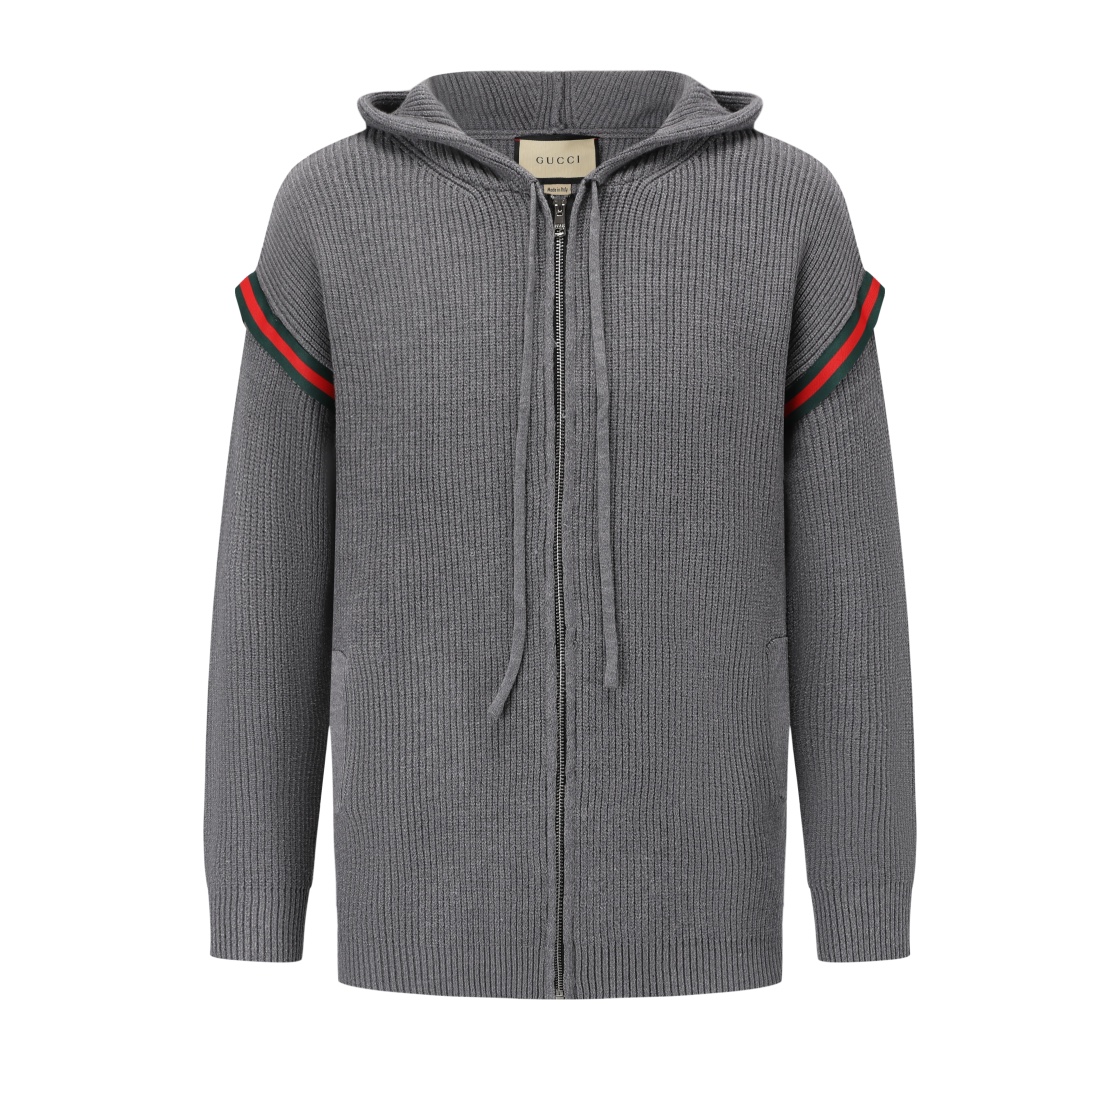 Gucci Clothing Cardigans Unisex Cashmere Cotton Knitting Wool Fall Collection